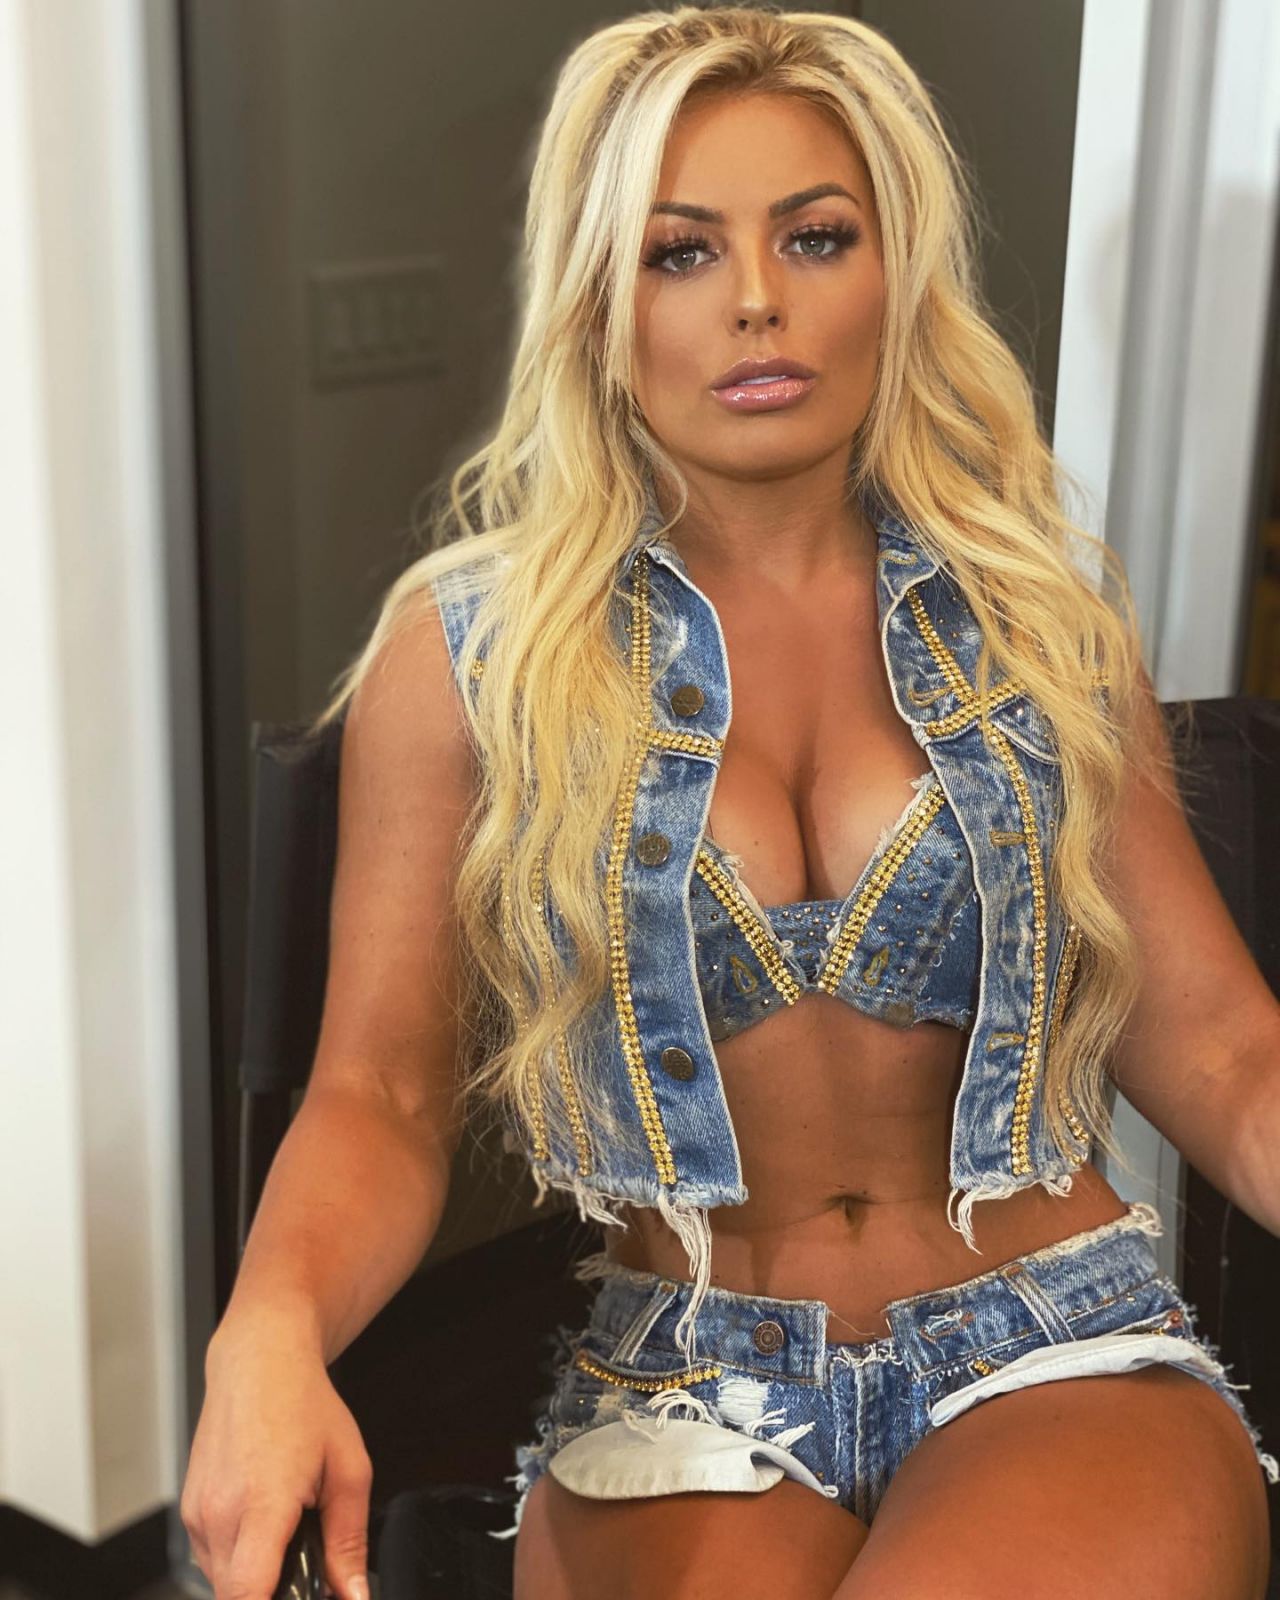 Mandy Rose Increases Adult Content And Subscription Rates After WWE Release